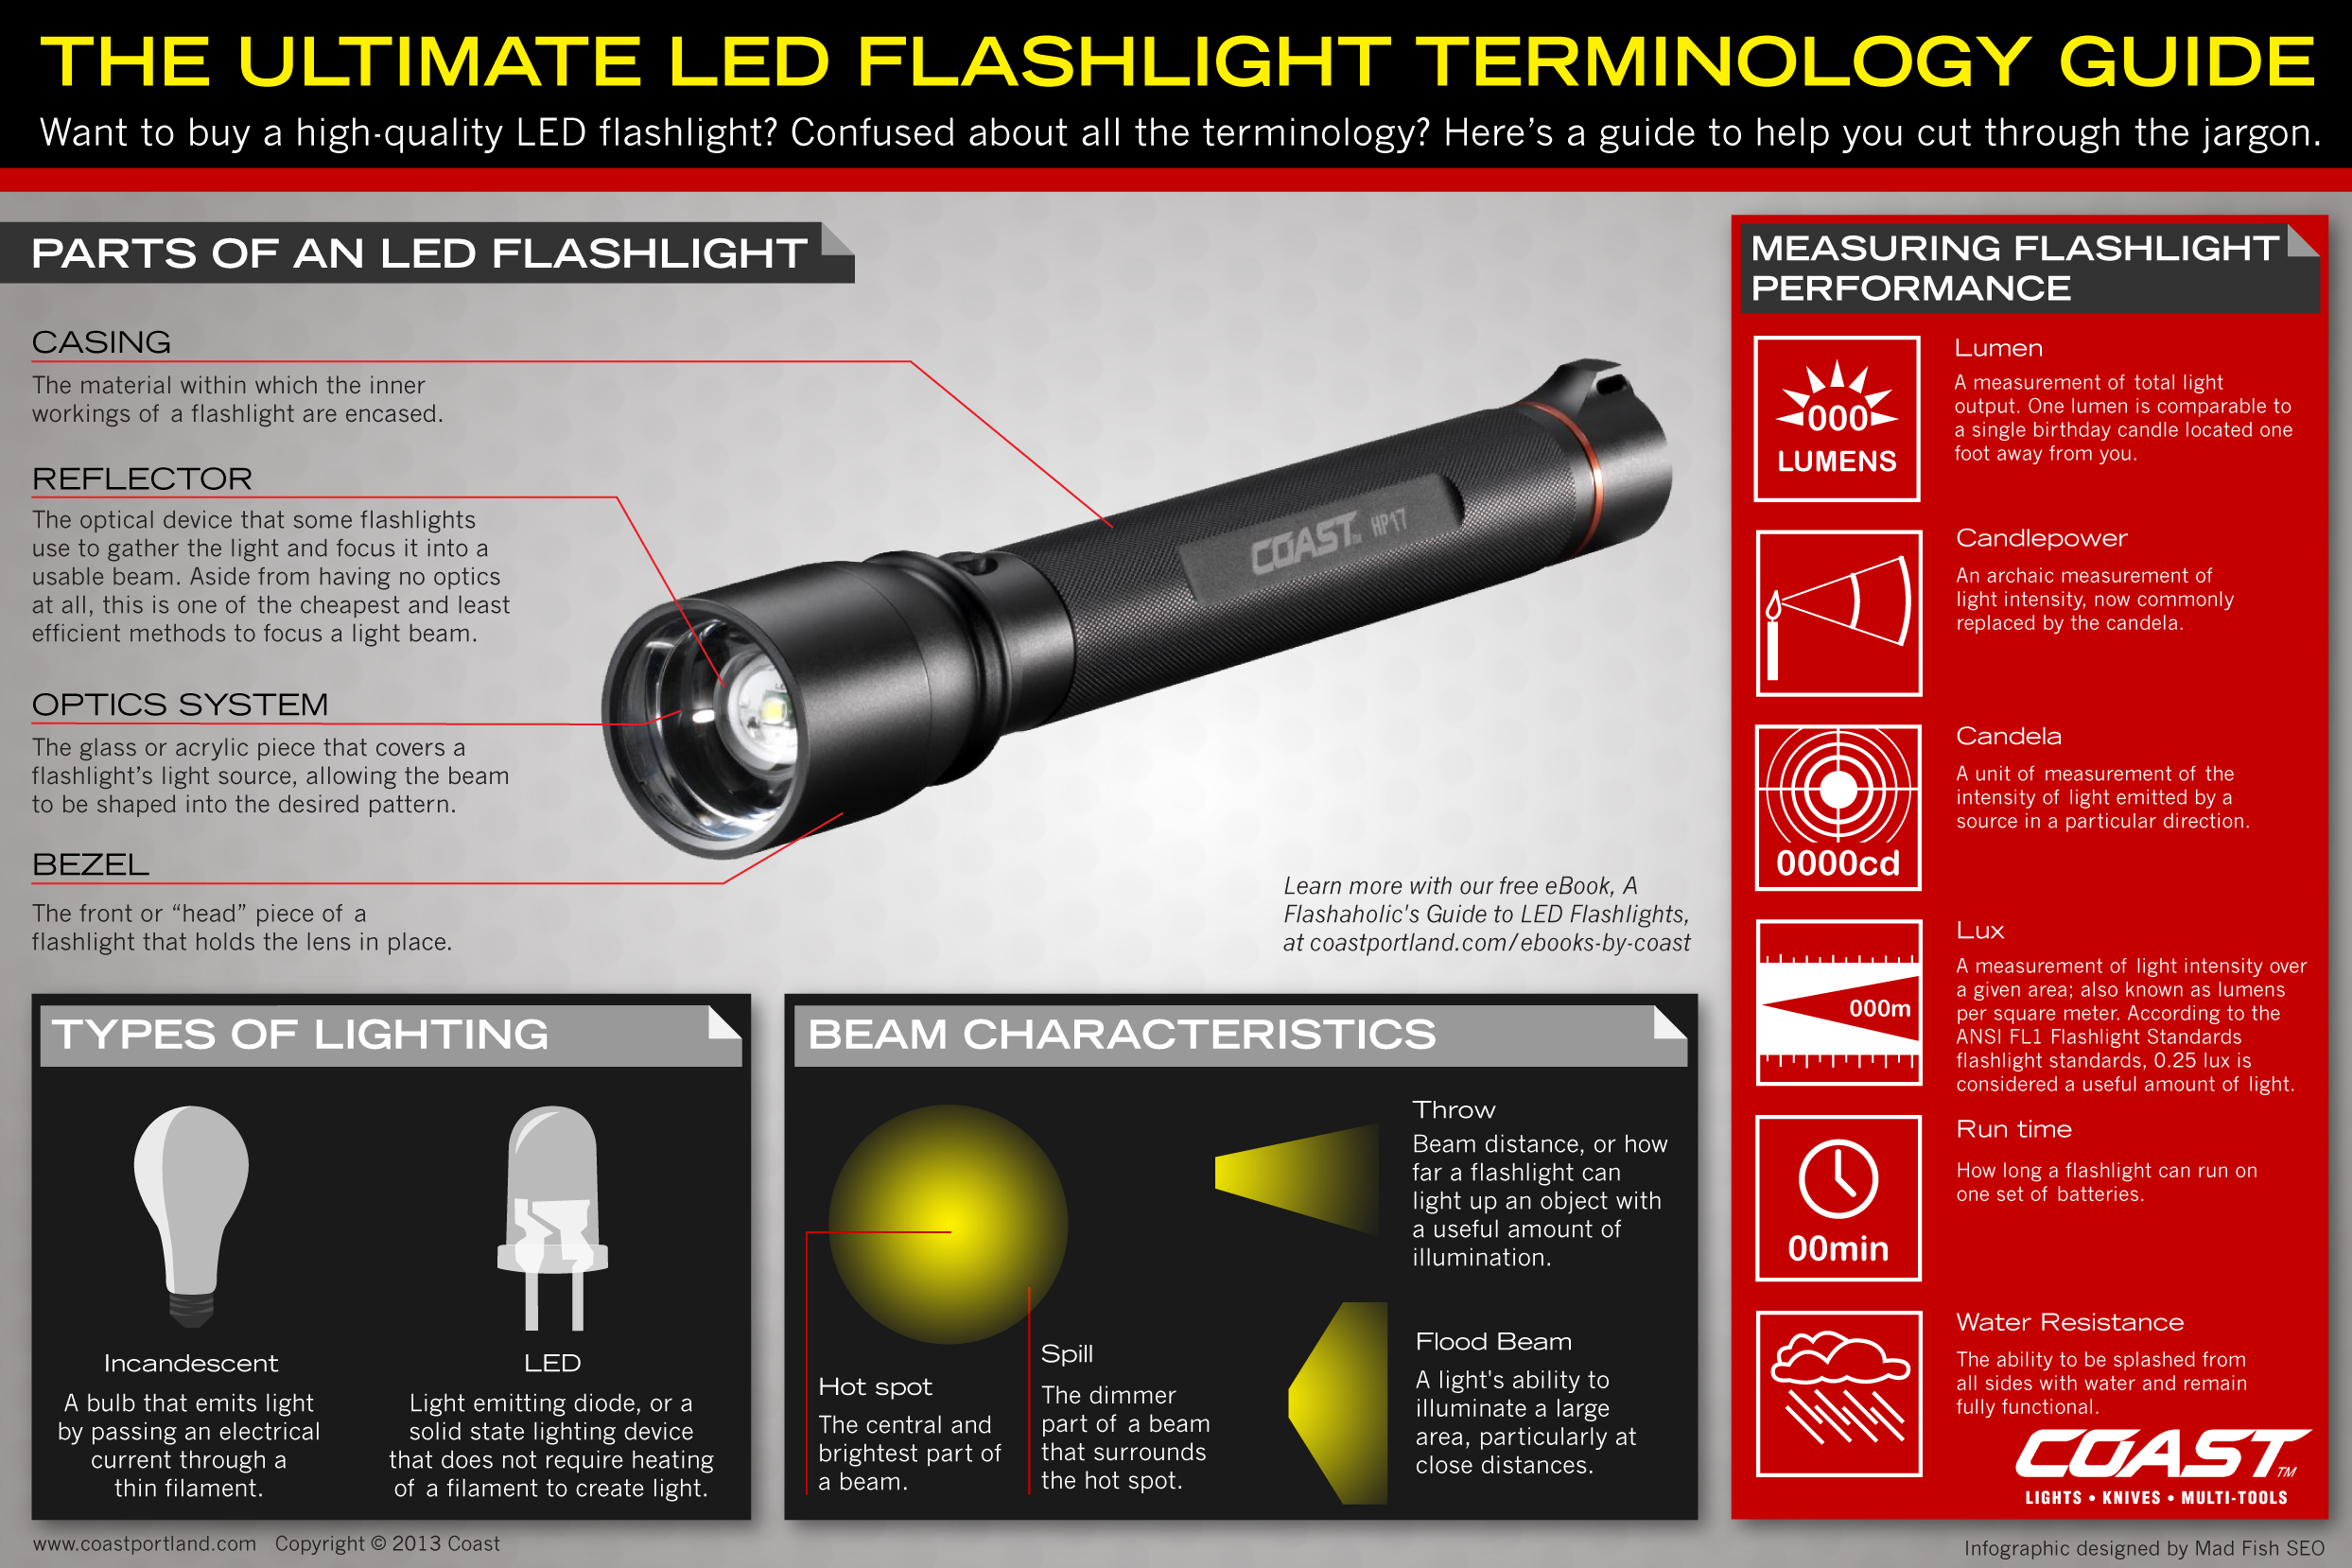 The Ultimate LED Flashlight Terminology Guide